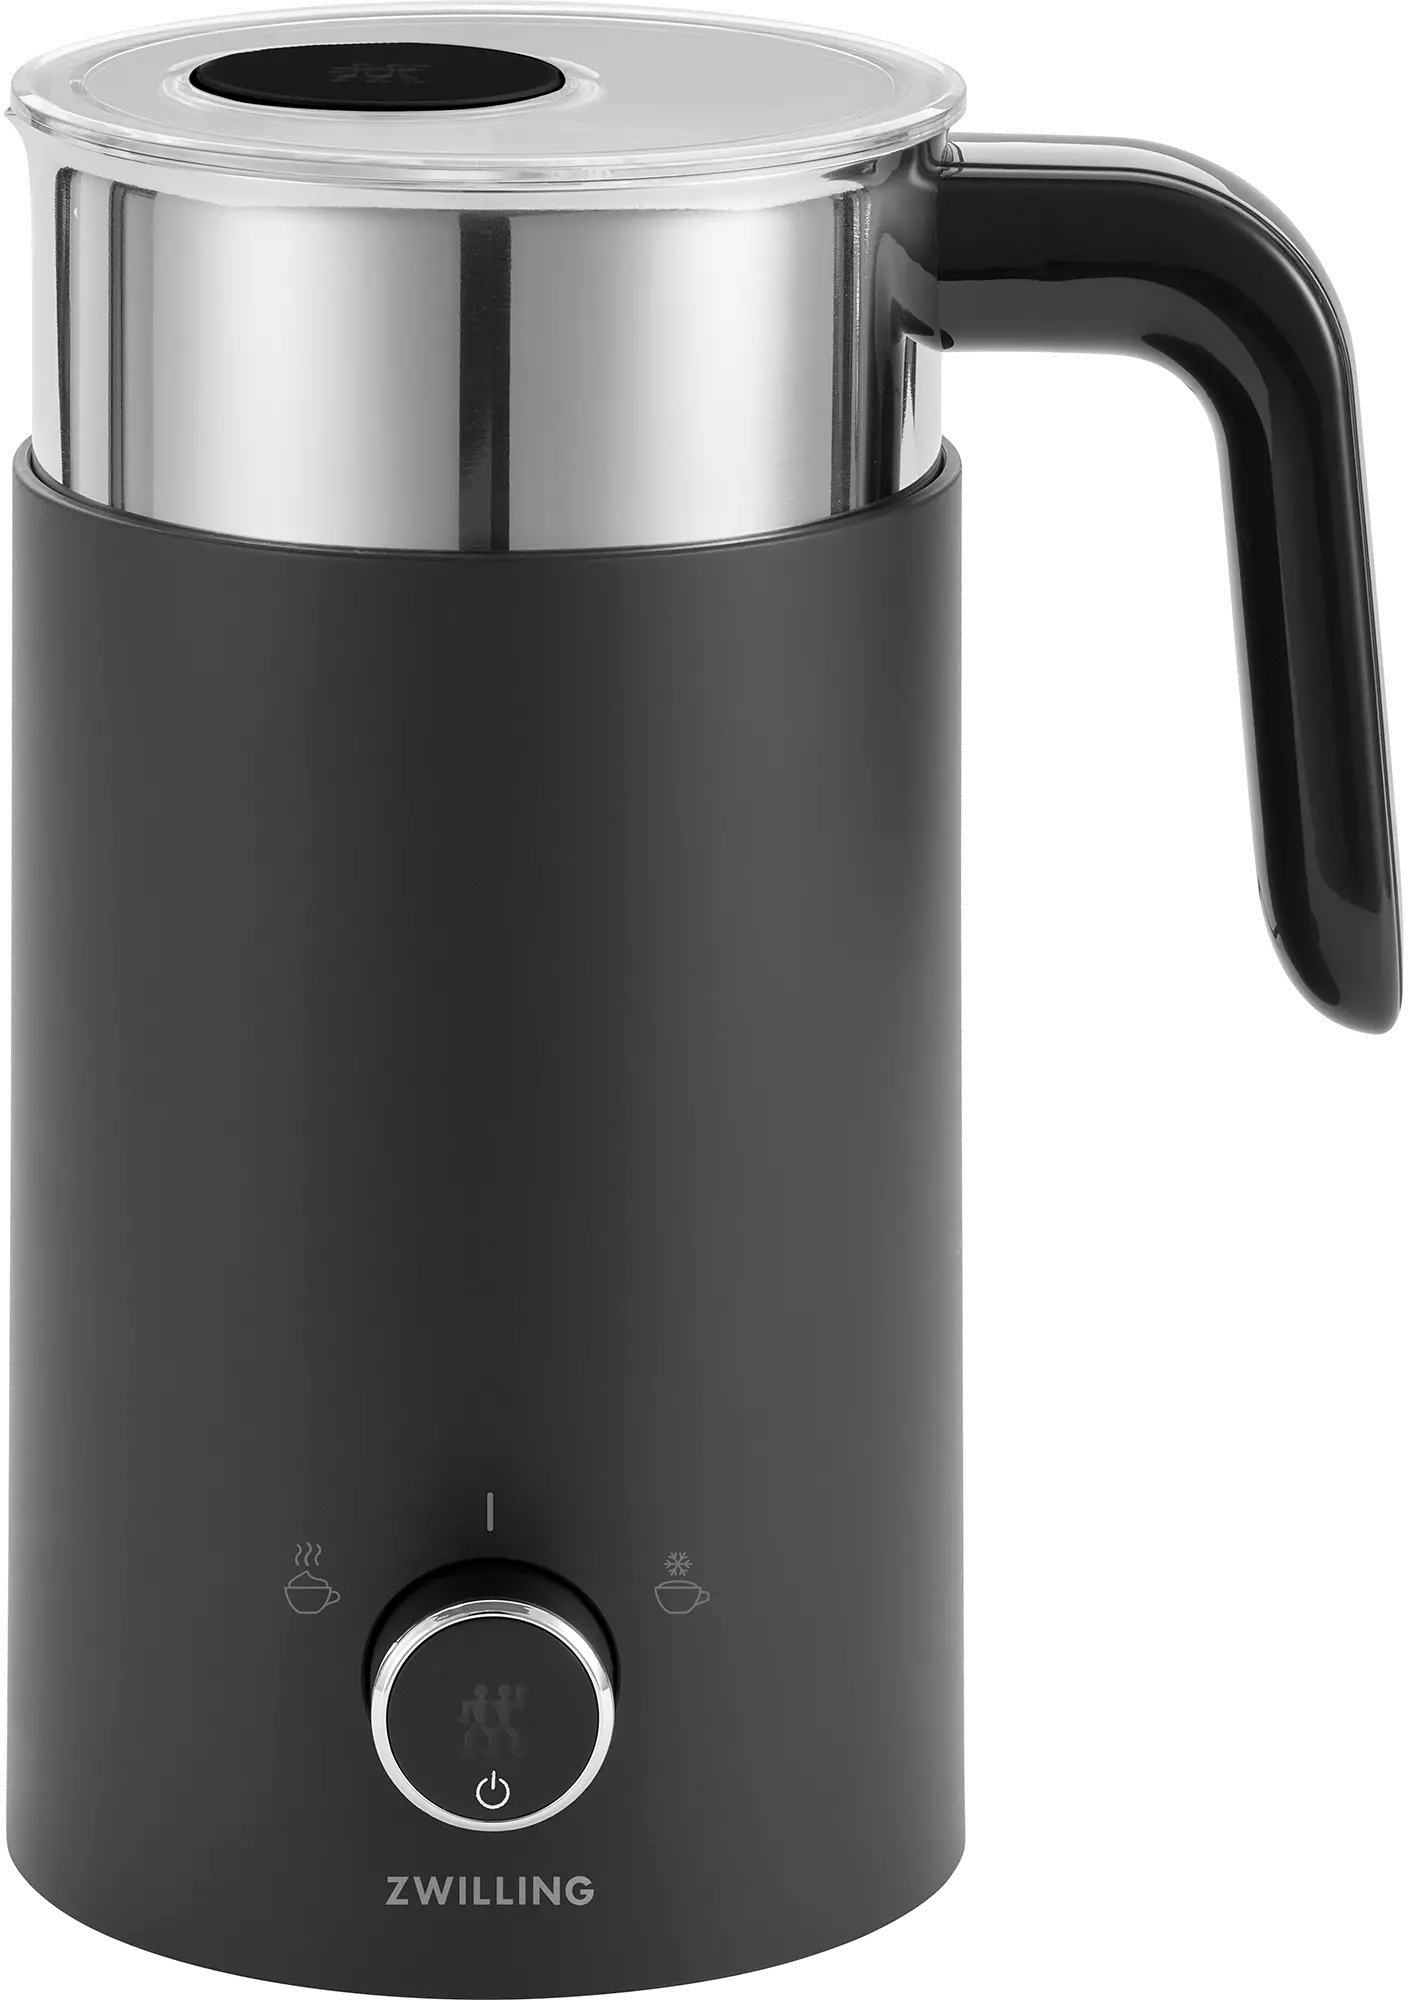 https://static.rcwilley.com/products/112935524/Zwilling-Enfinigy-Milk-Frother---Black-rcwilley-image1.webp